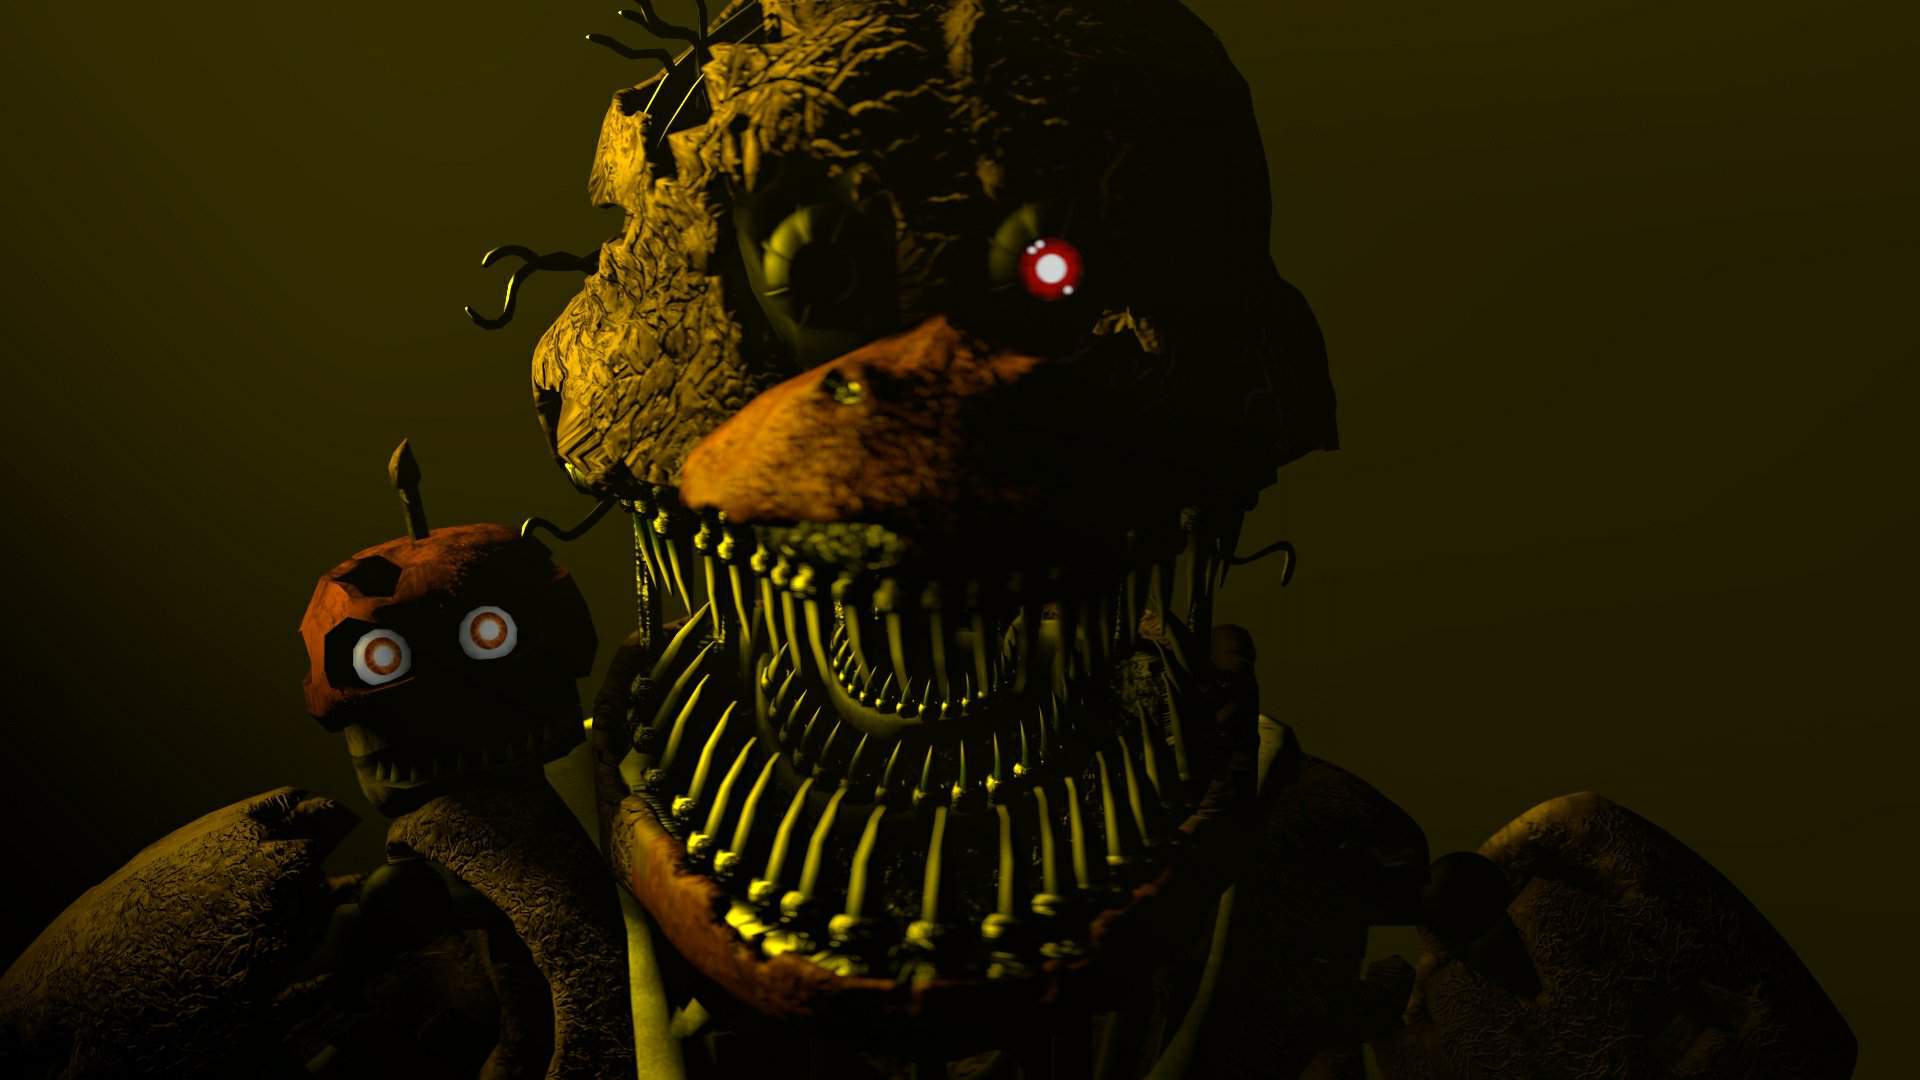 Nightmare chica or Jack o chica. 